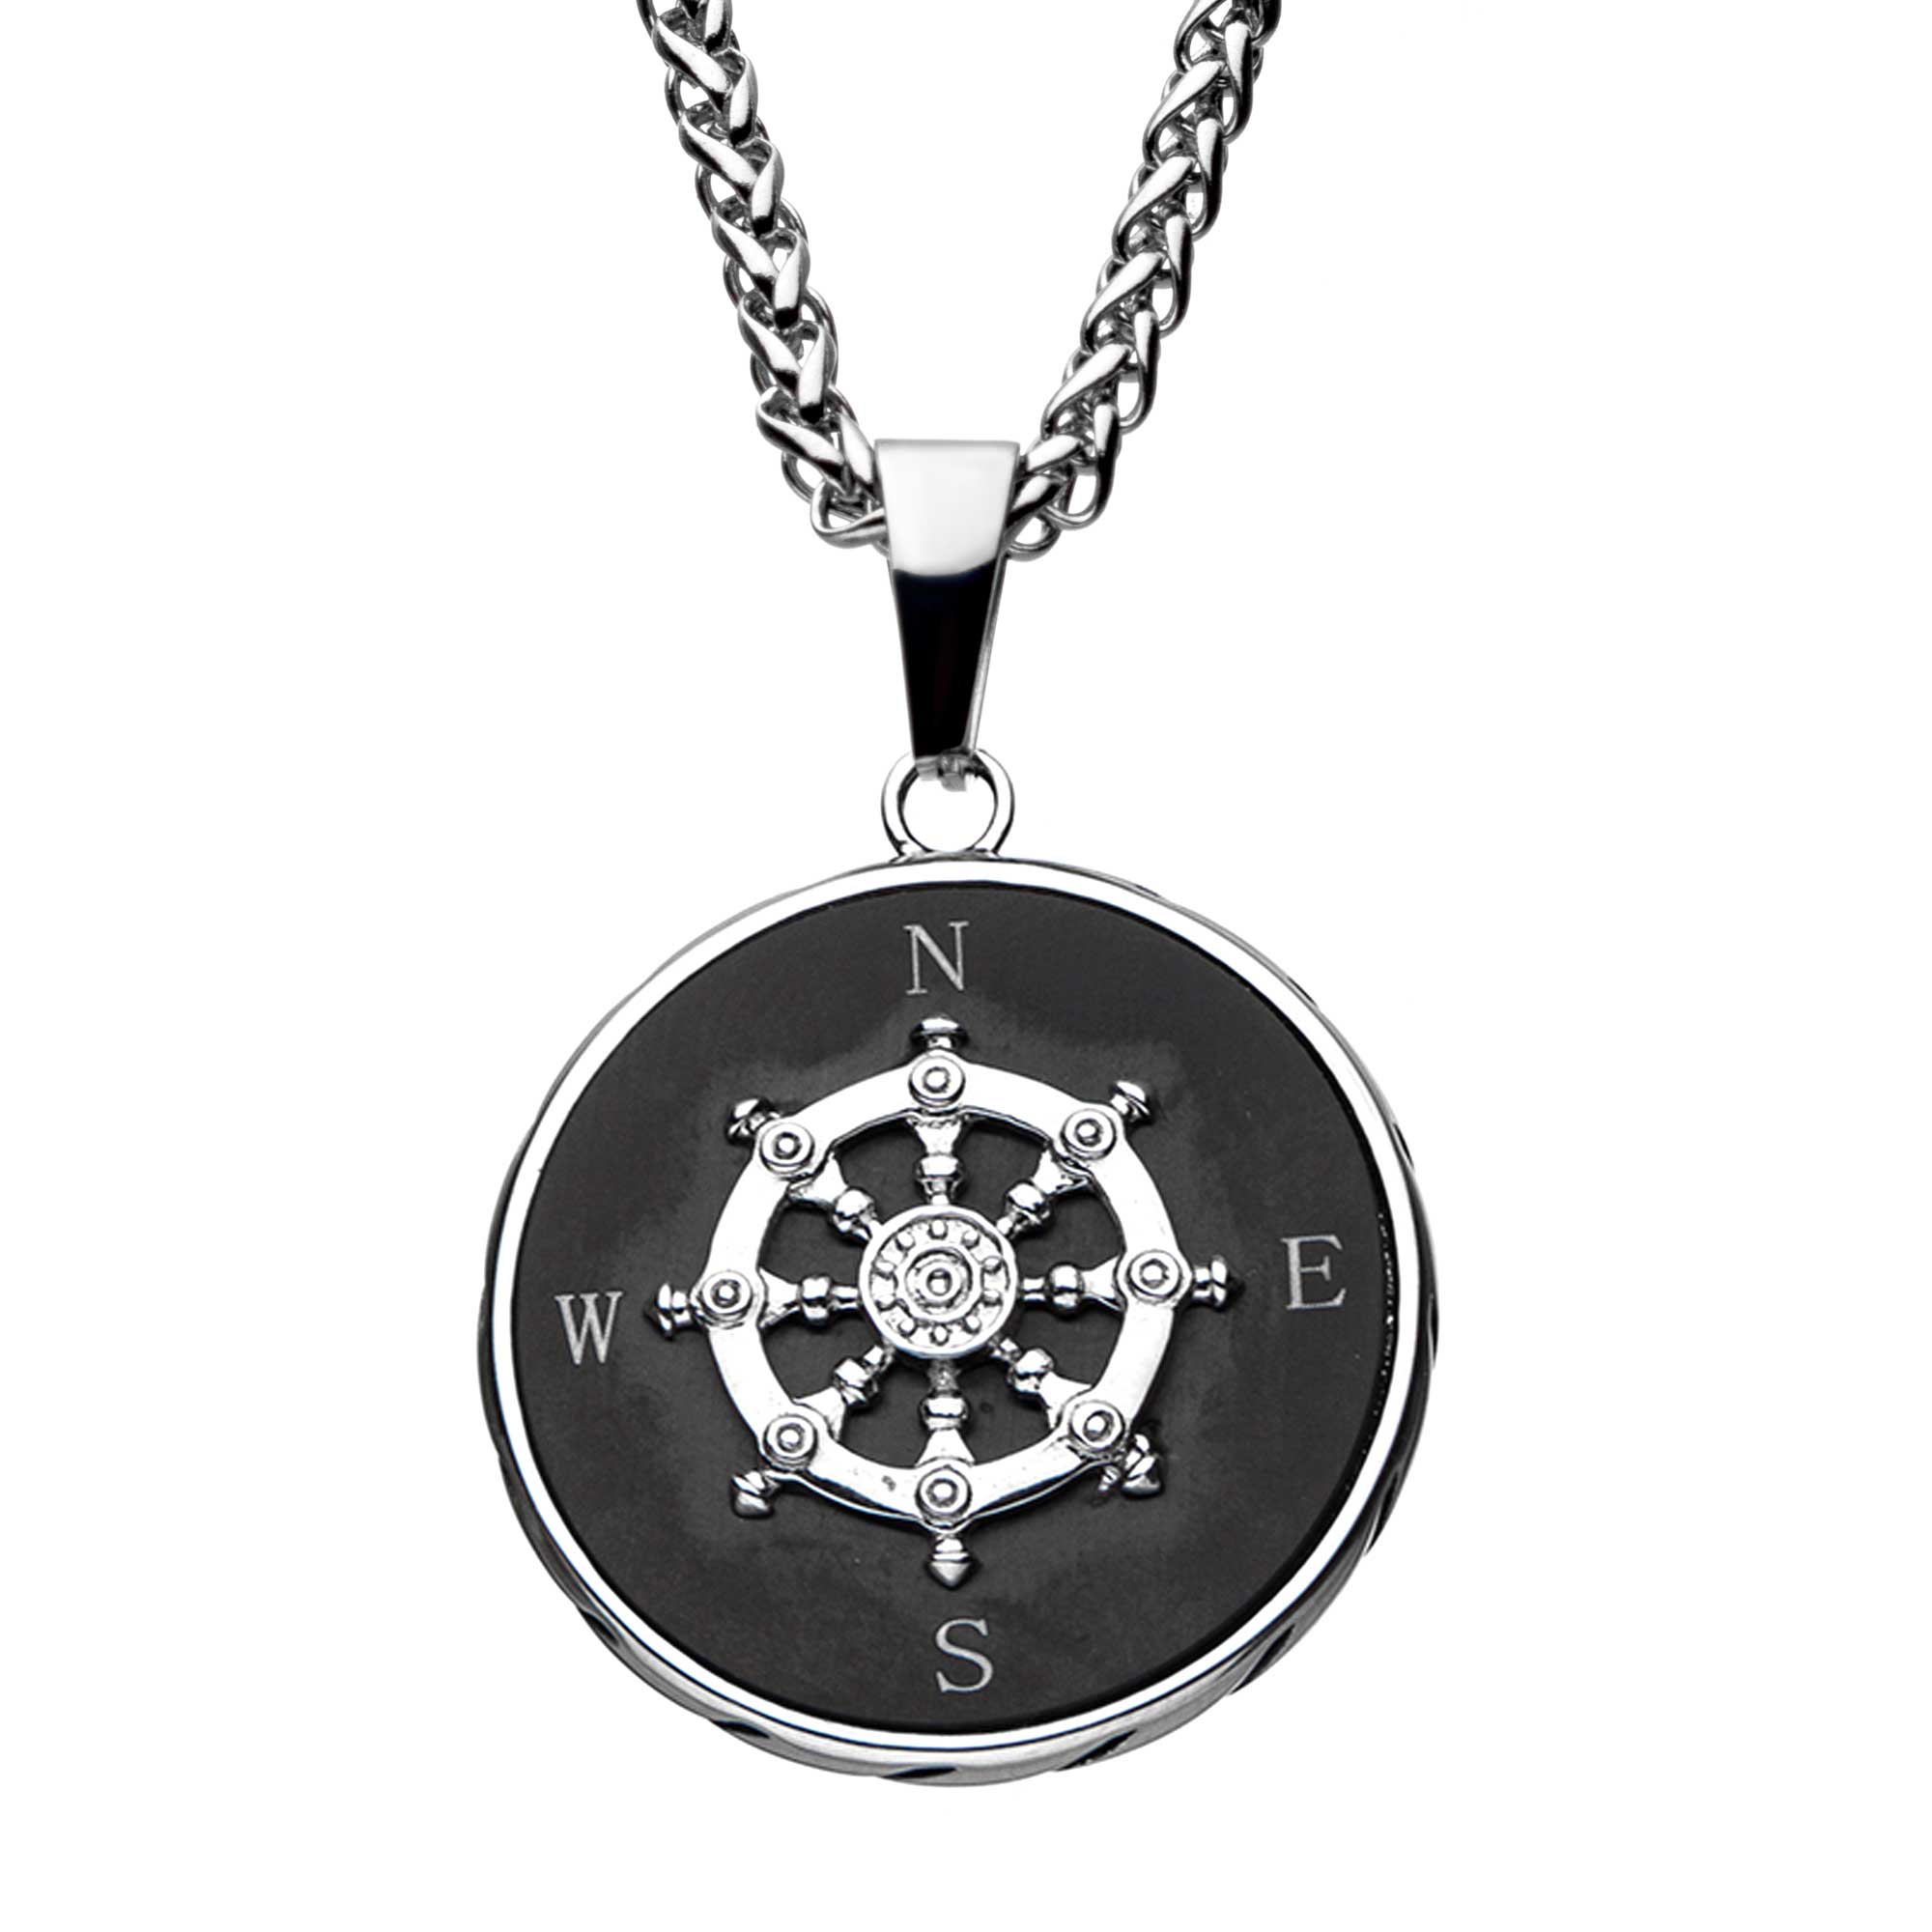 Stainless Steel Black Plated Ship's Wheel Compass Pendant with Chain Mueller Jewelers Chisago City, MN